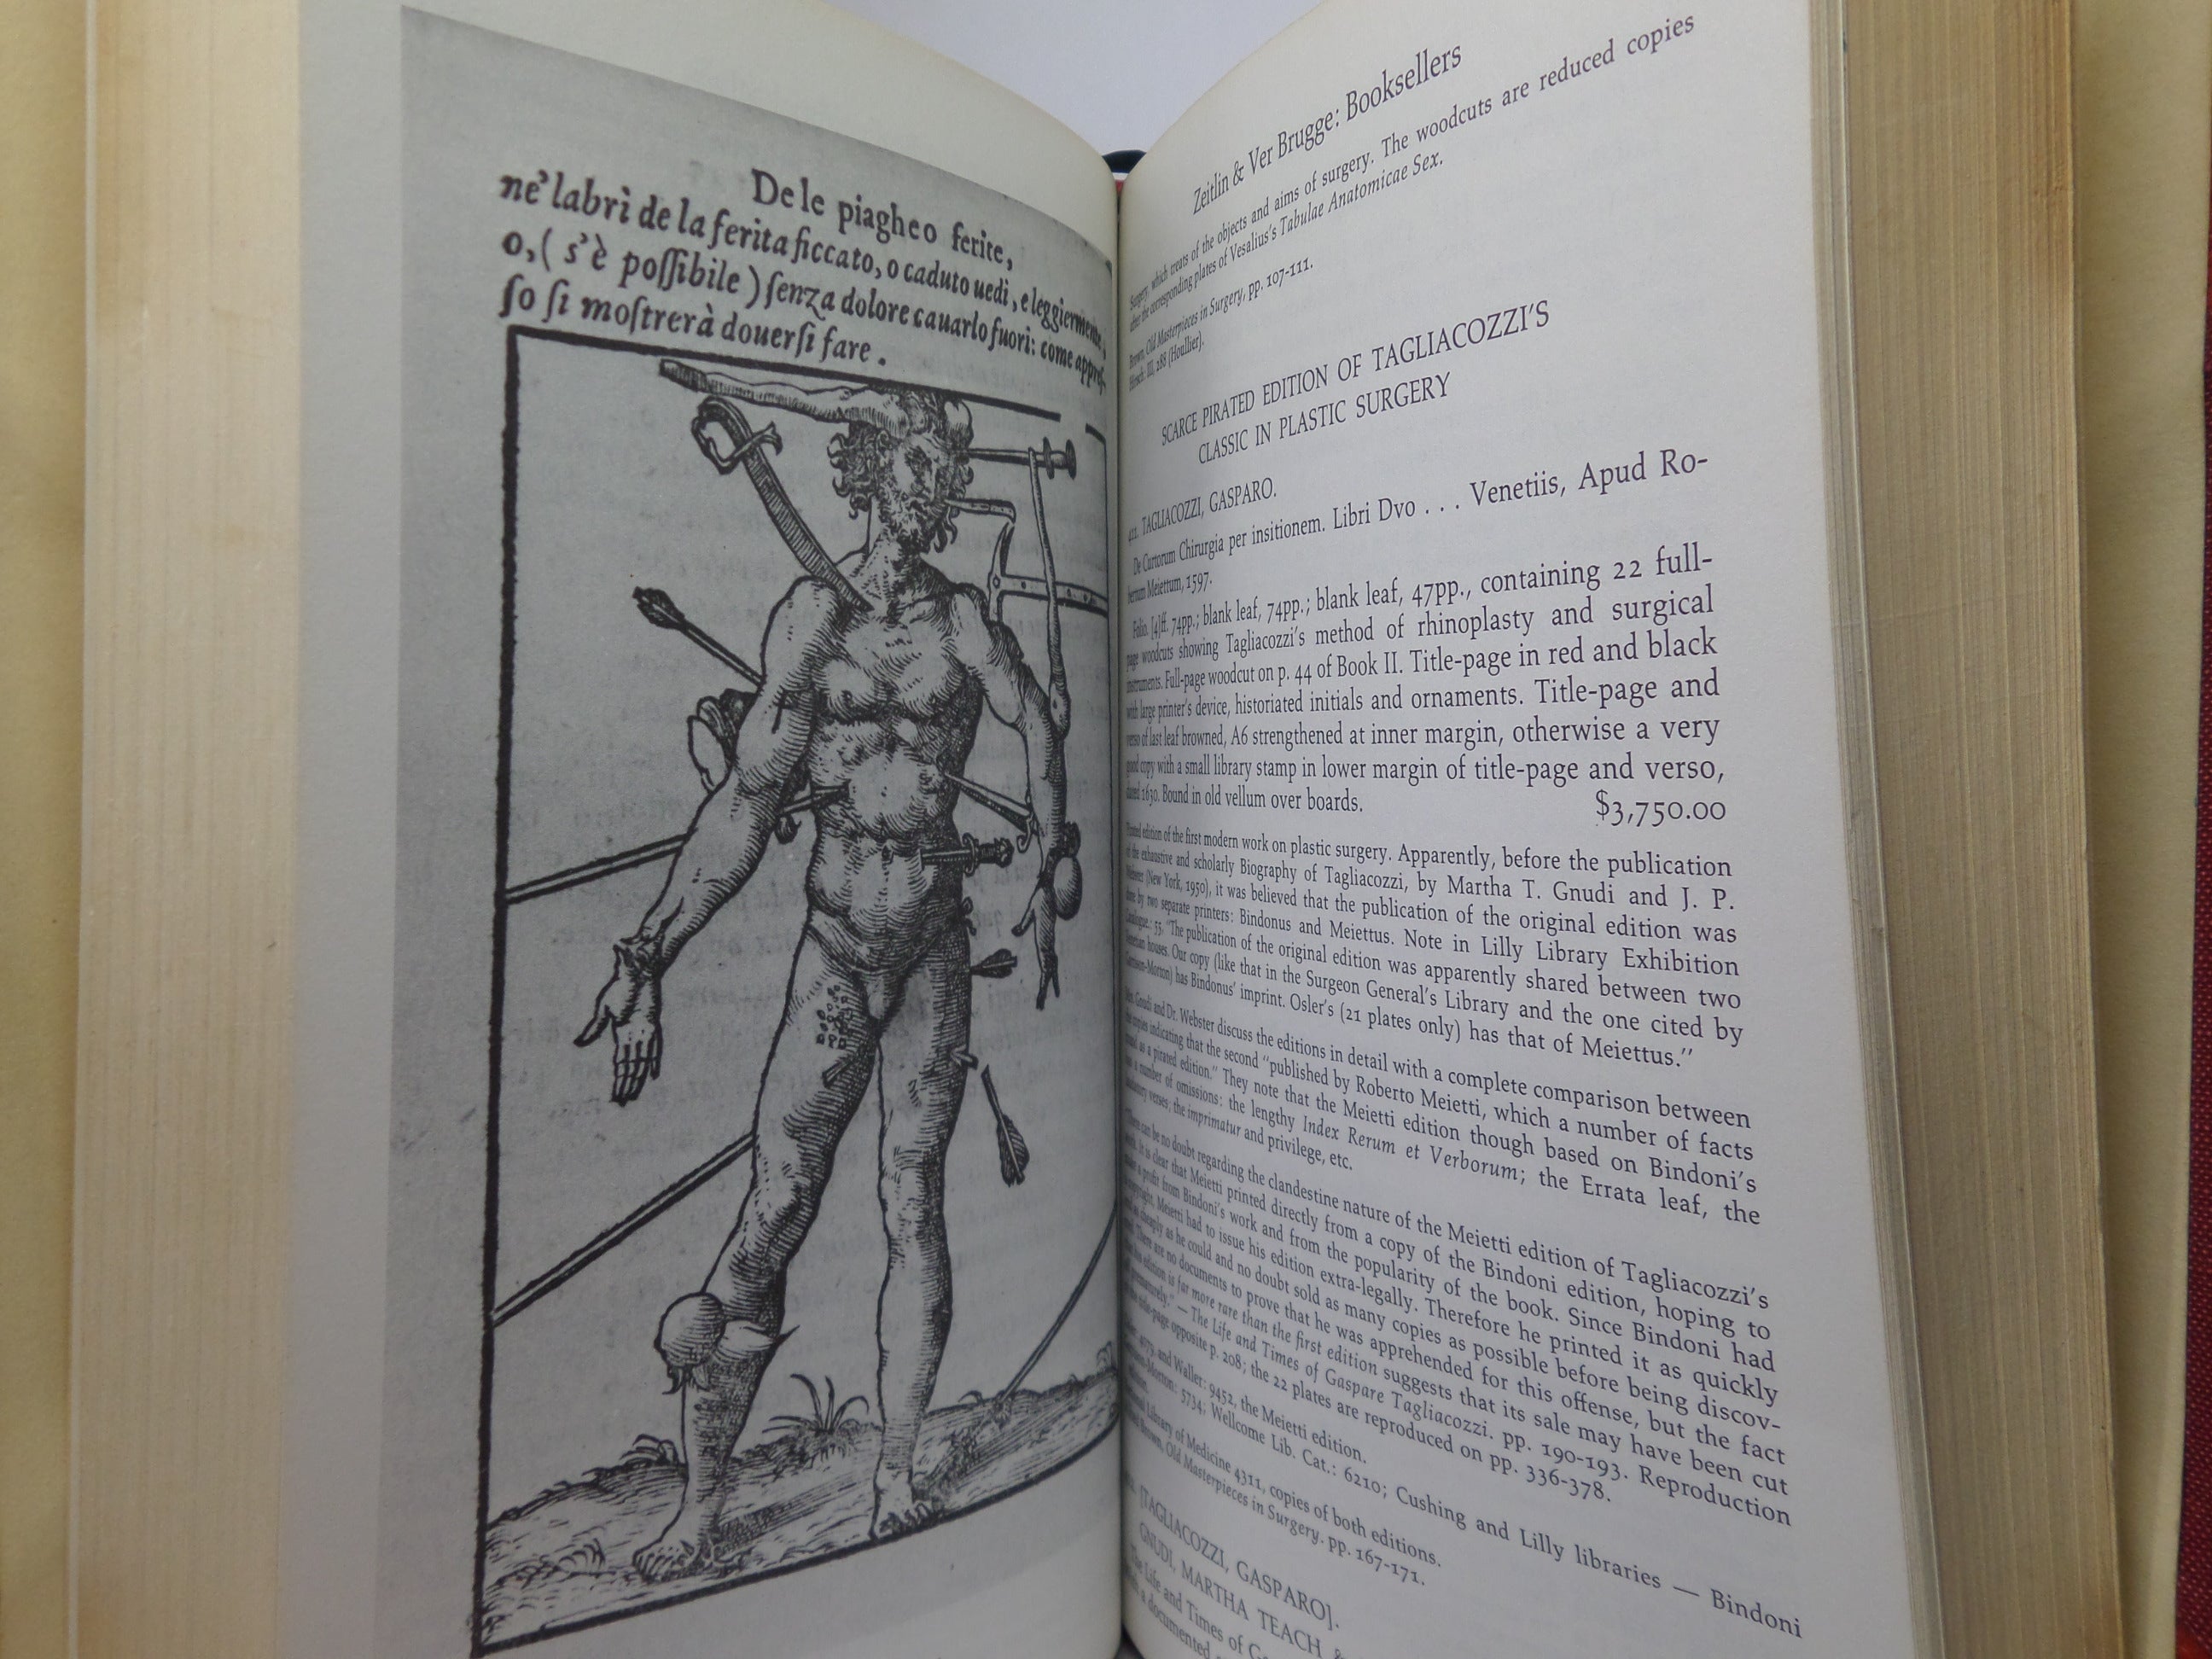 THE AZOTH OR UNIVERSAL PANACEA - CATALOGUES OF RARE BOOKS ON THE HEALING AND MEDICAL SCIENCES 1973-1975